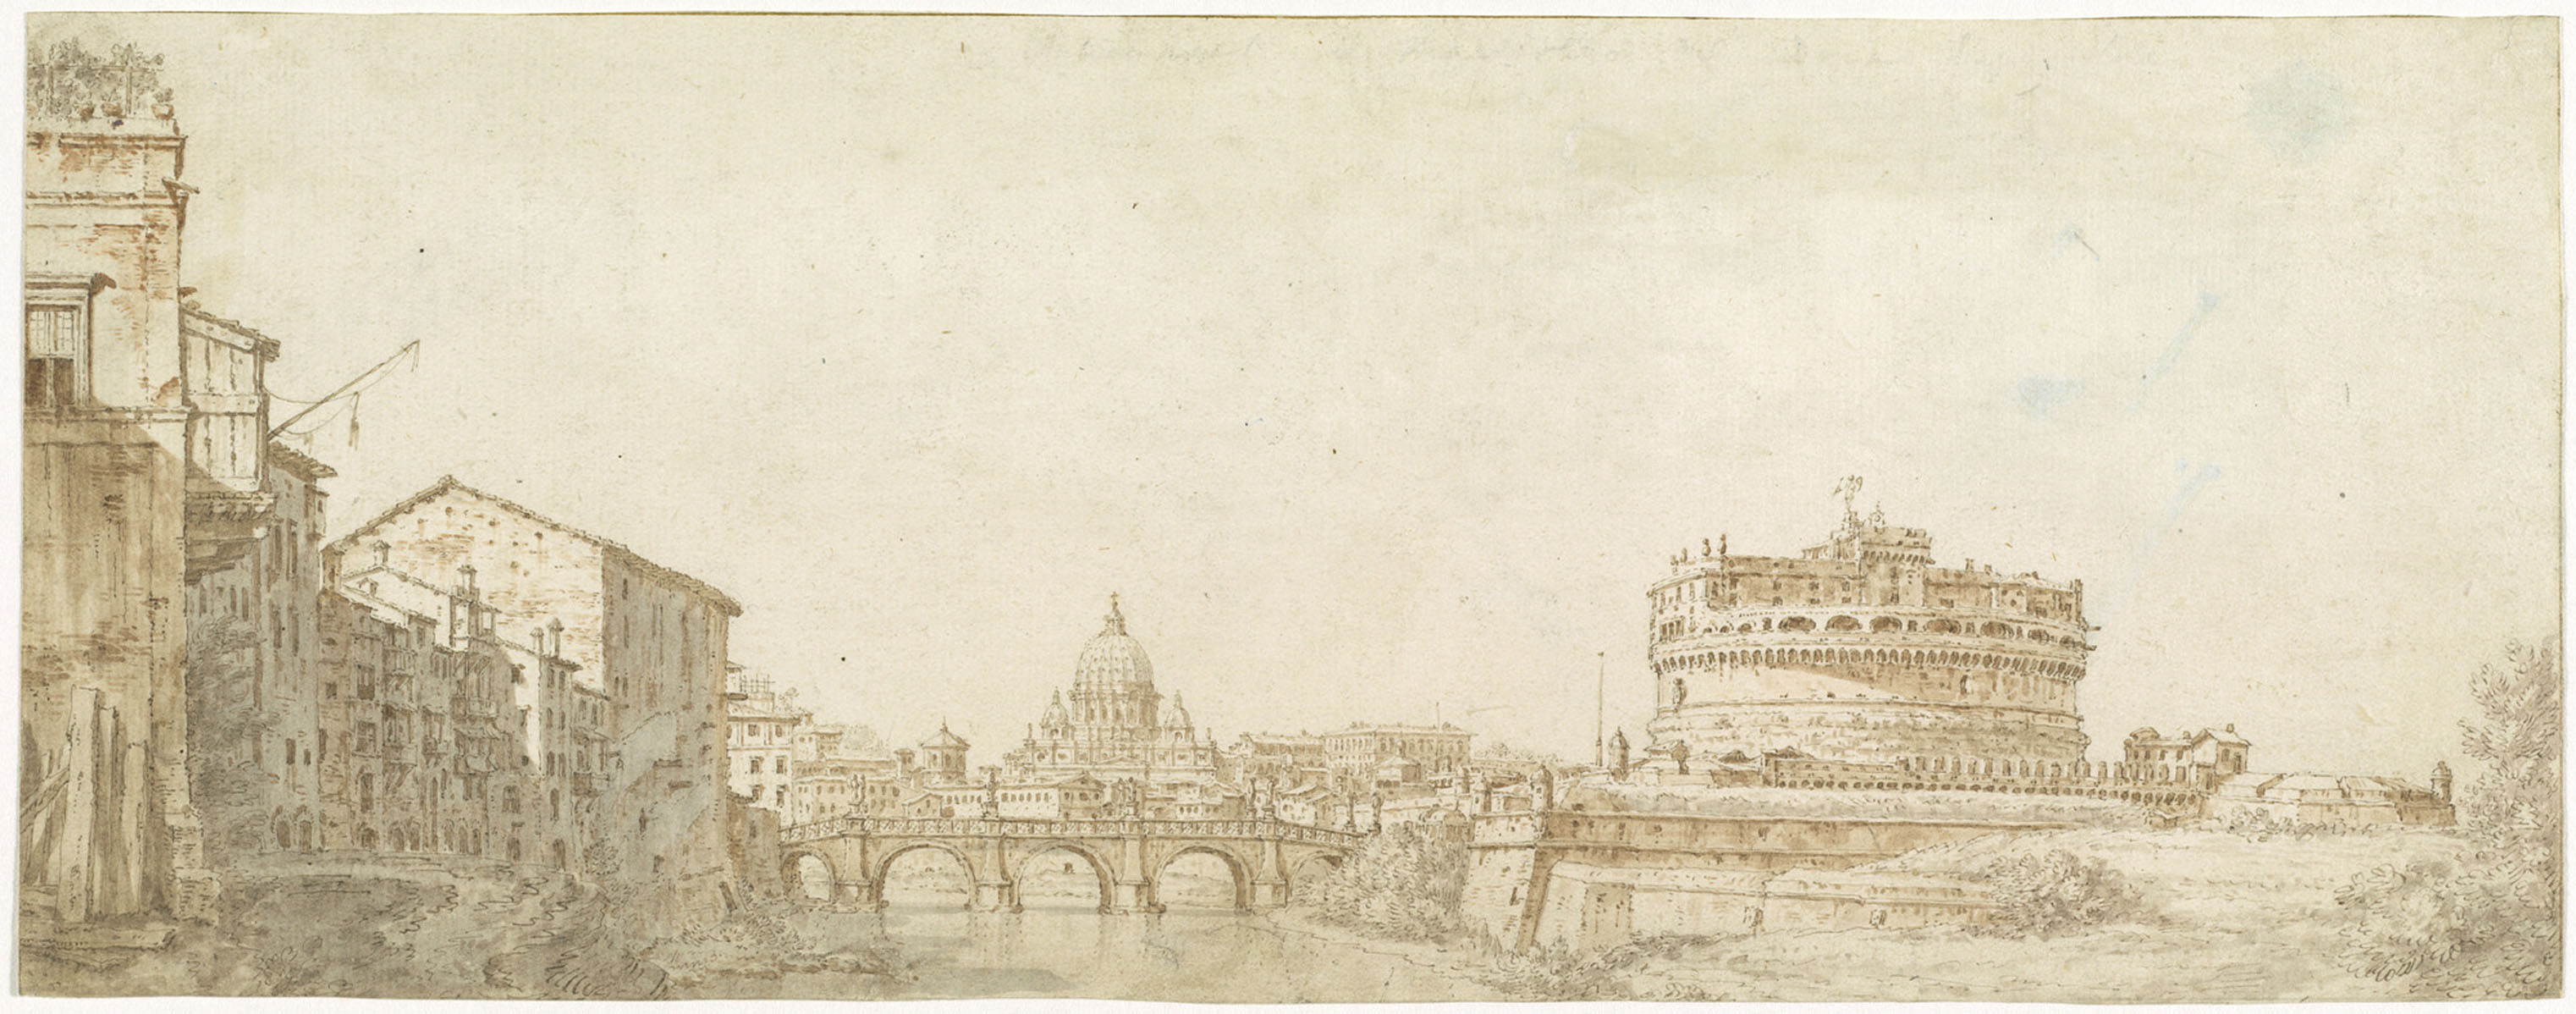 Giuseppe Zocchi (Italian, 1711 - 1767 ), View of Rome with the Dome of Saint Peter\'s and the Castel Sant\' Angelo, c. 1750, pen and brown ink with sanguine, brown, and gray wash over graphite on laid paper, Wolfgang Ratjen Collection, Purchased as the Gift of Vincent and Linda Buonanno